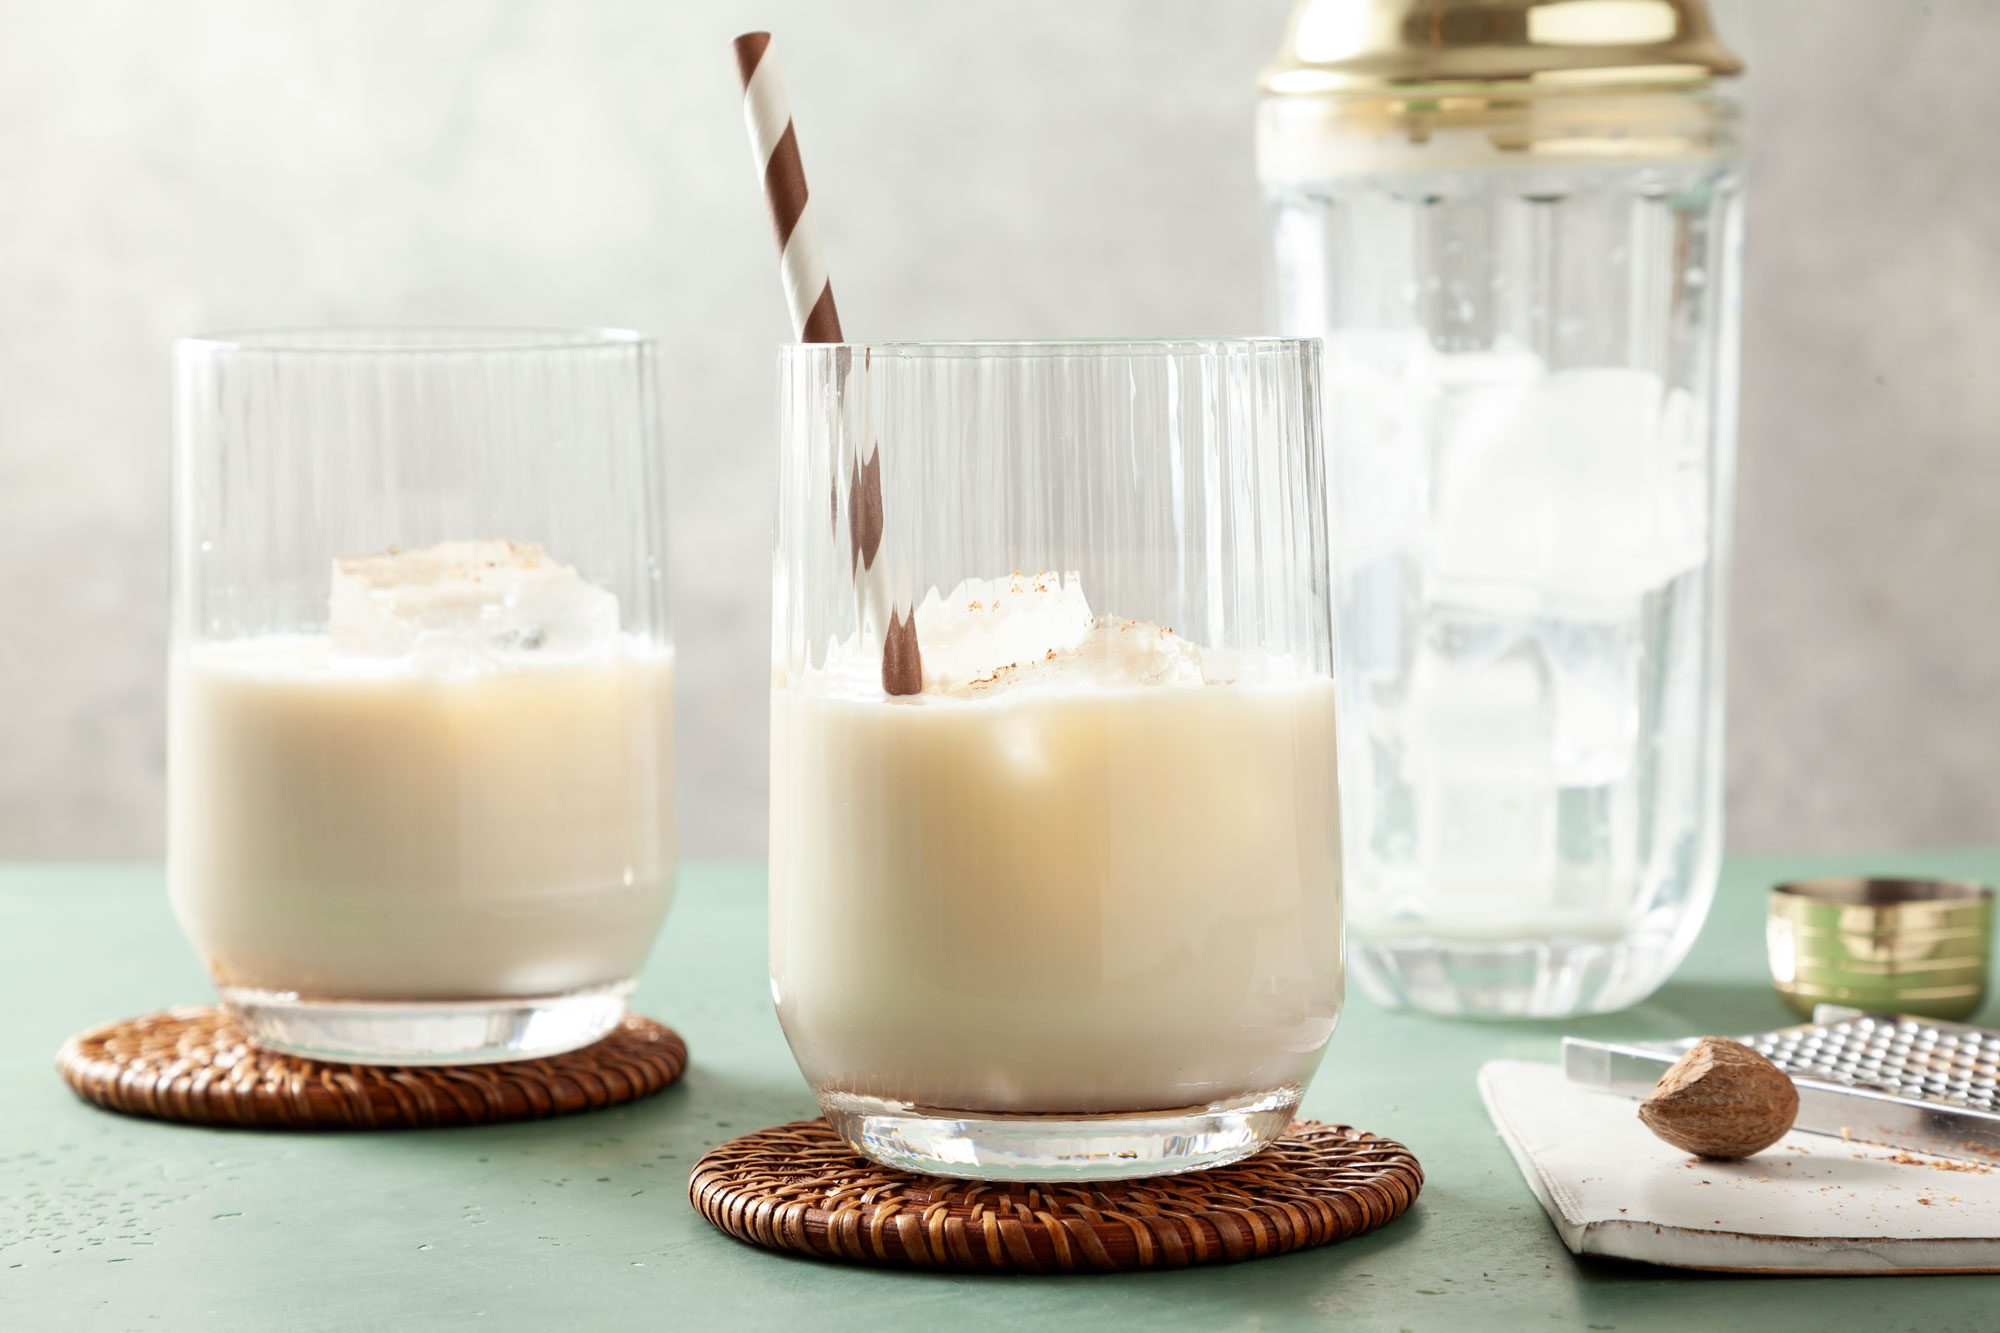 Two delicious Milk Punch glasses of with ice and straws sprinkled with nutmeg